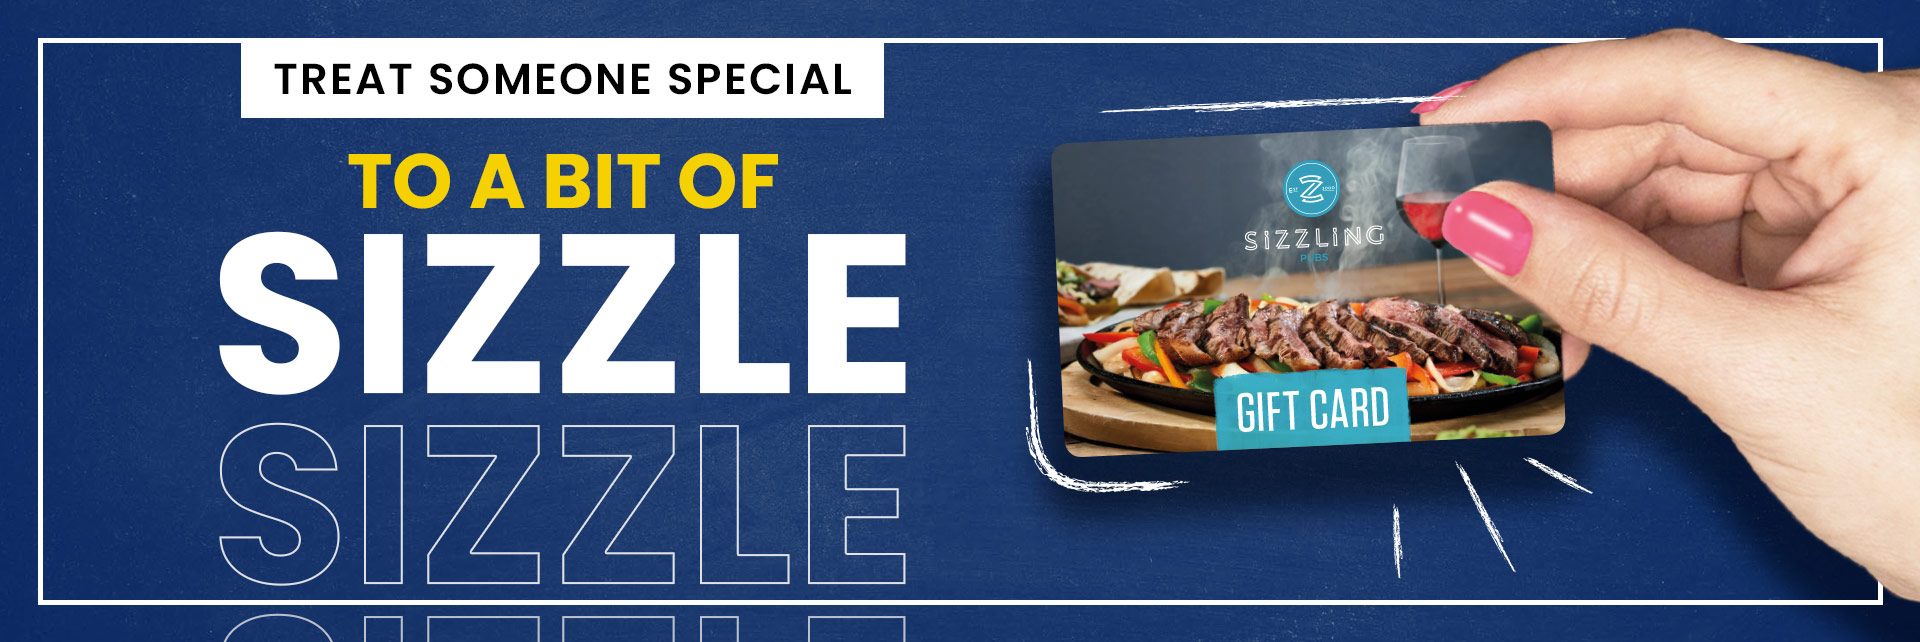 Sizzling Pubs Gift Card at The Southdowns in Bognor Regis